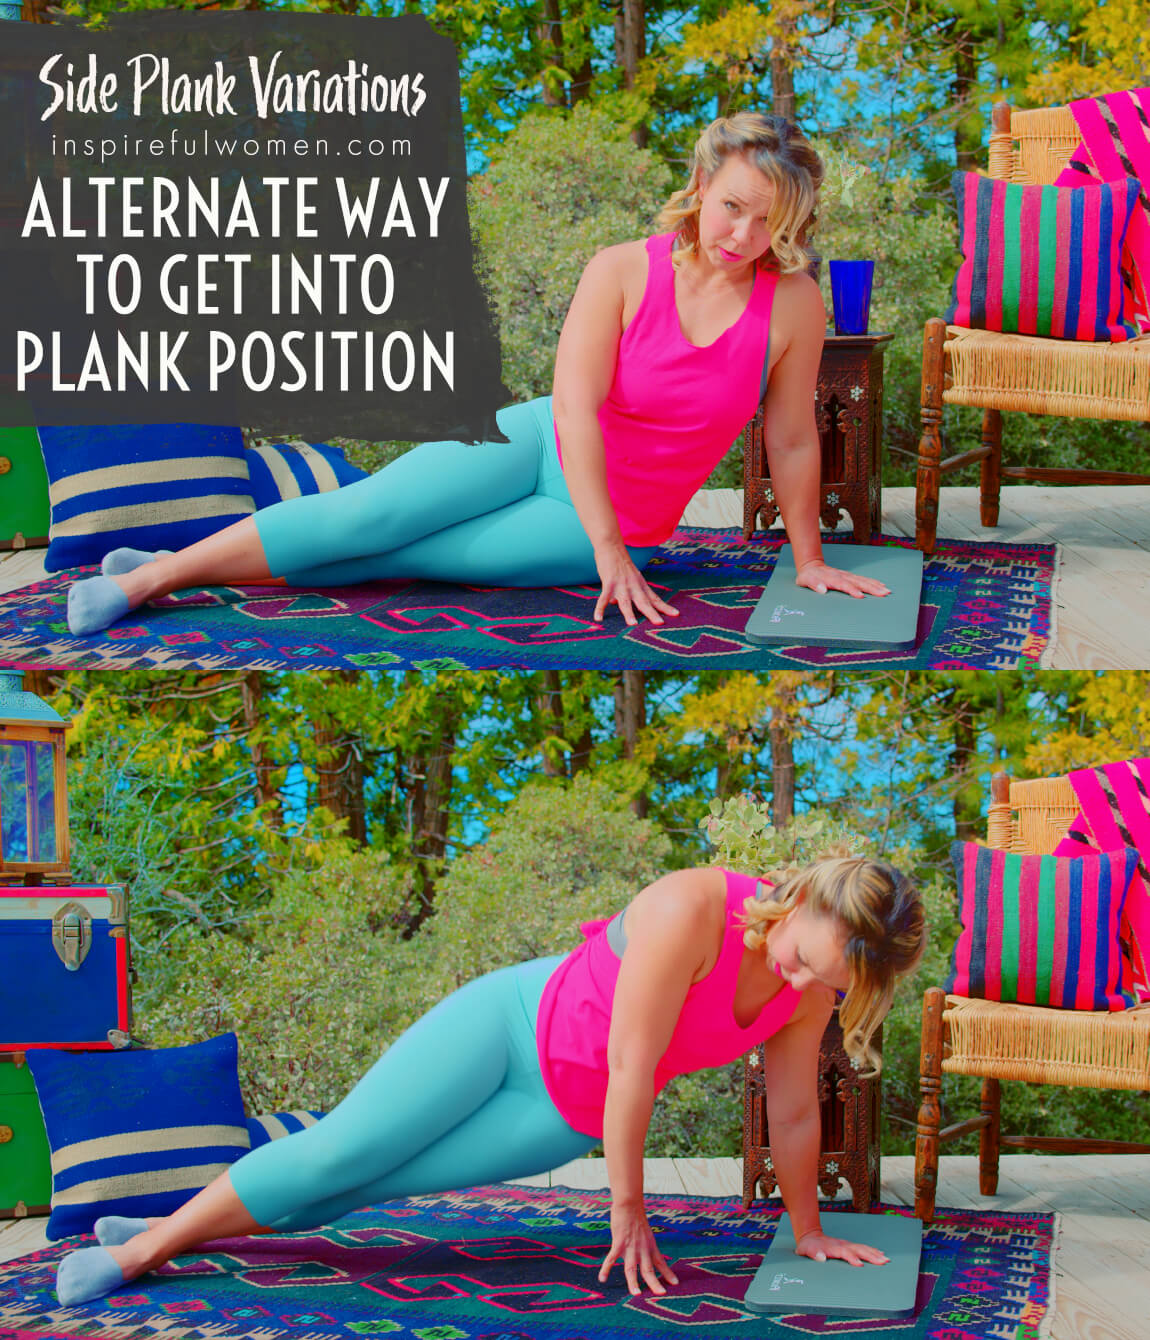 alternate-way-to-get-into-plank-position-side-planks-straight-leg-obliques-core-exercise-variation